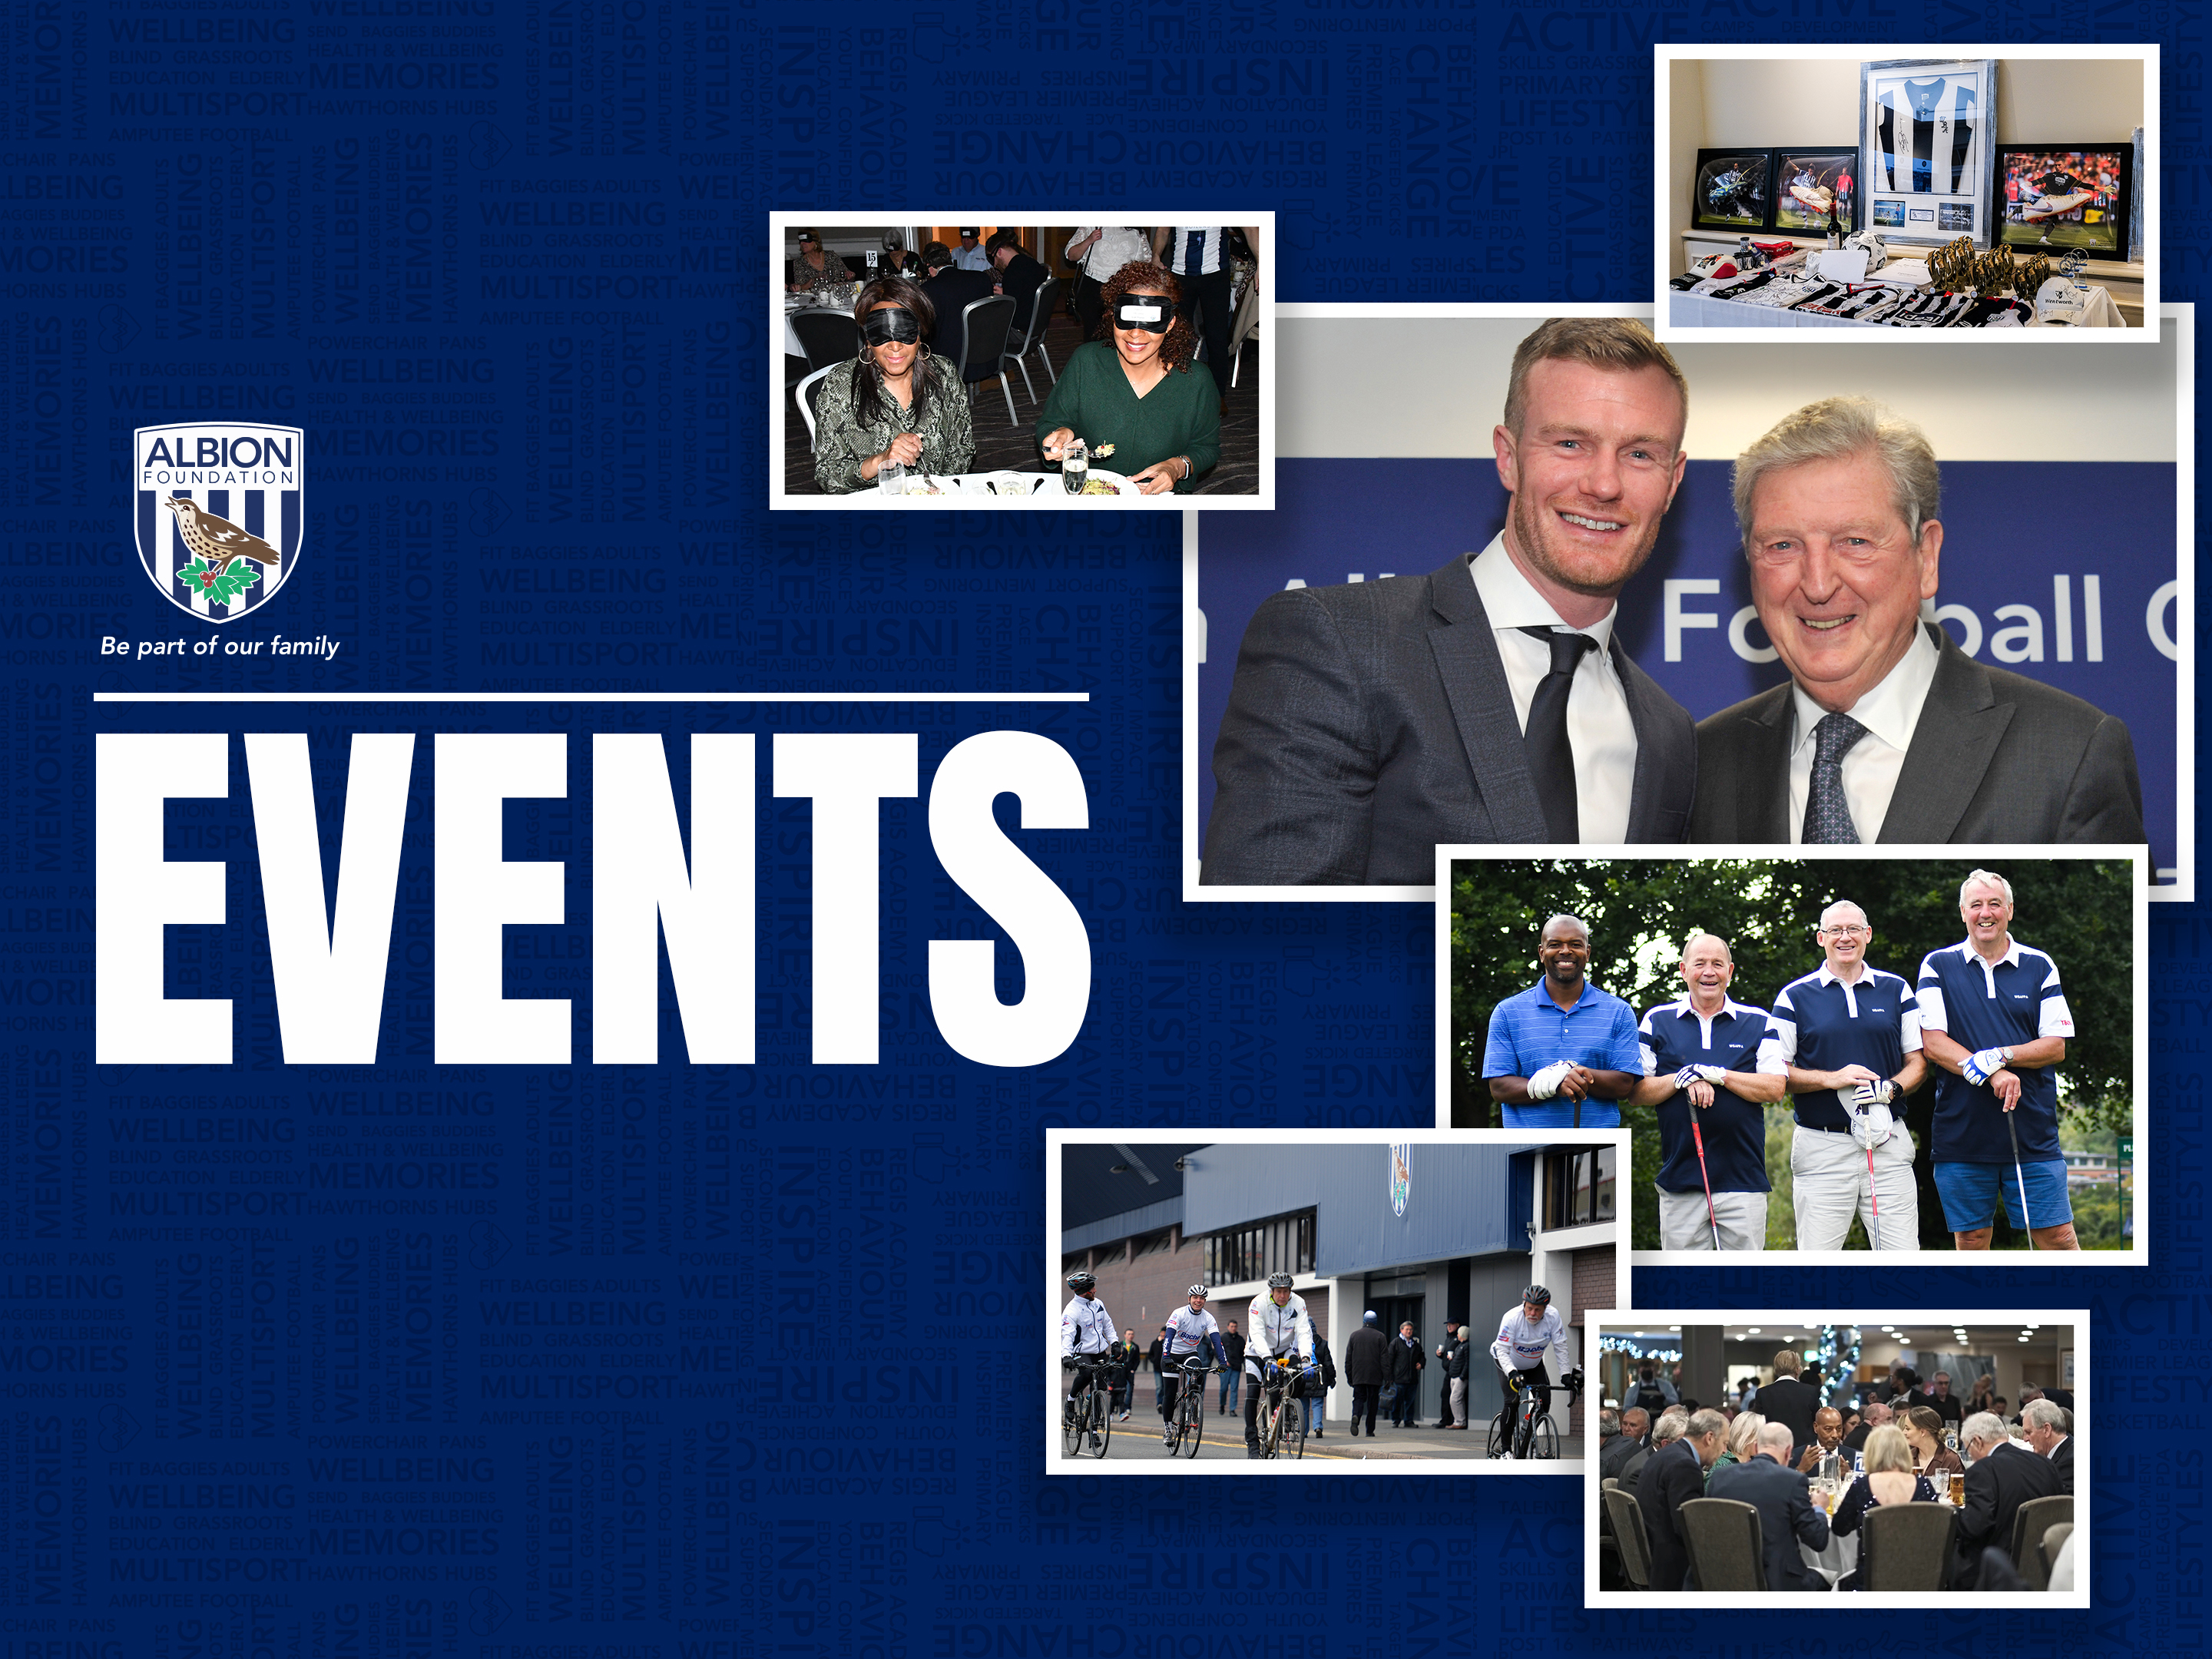 The Albion Foundation Events